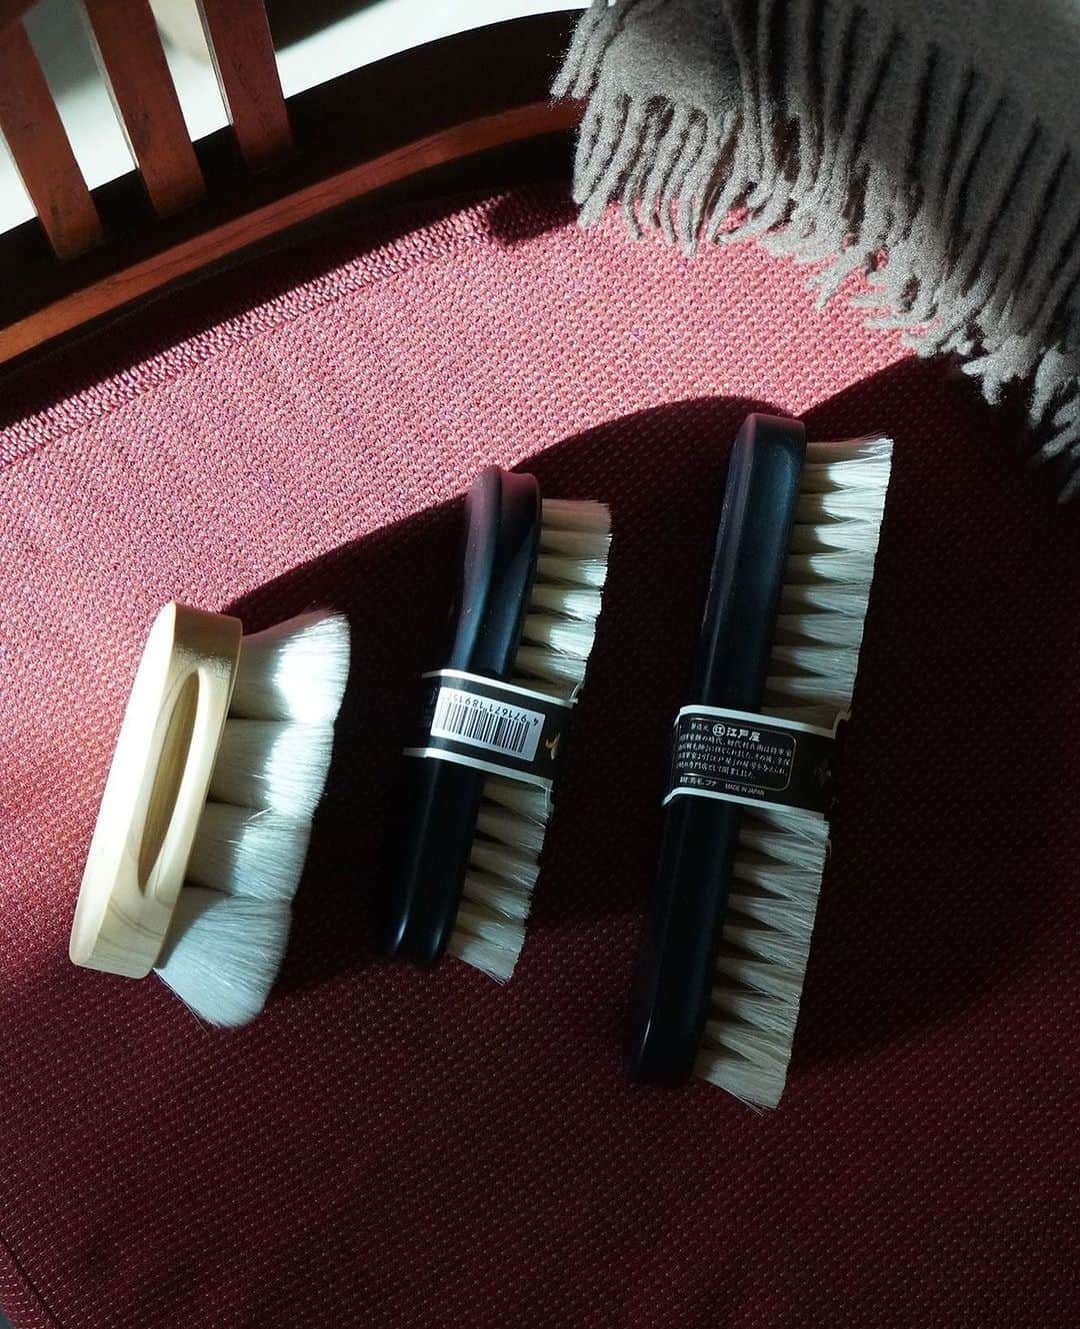 bootblack_officialのインスタグラム：「Boot Black brushes available at @thedecorumsg 🇸🇬 #bootblackshoeshine#bootblackshoecare#highshine#shoecare#shoeshine#shoepolish#shoegazing#shoestagram#leathershoes#madeinjapan#japanmade#japan#classicshoes#dressshoes#shoegram#mirrorshine#shoeaddiction#shoeaddict#singapore#thedecorum#thedecorumsg」